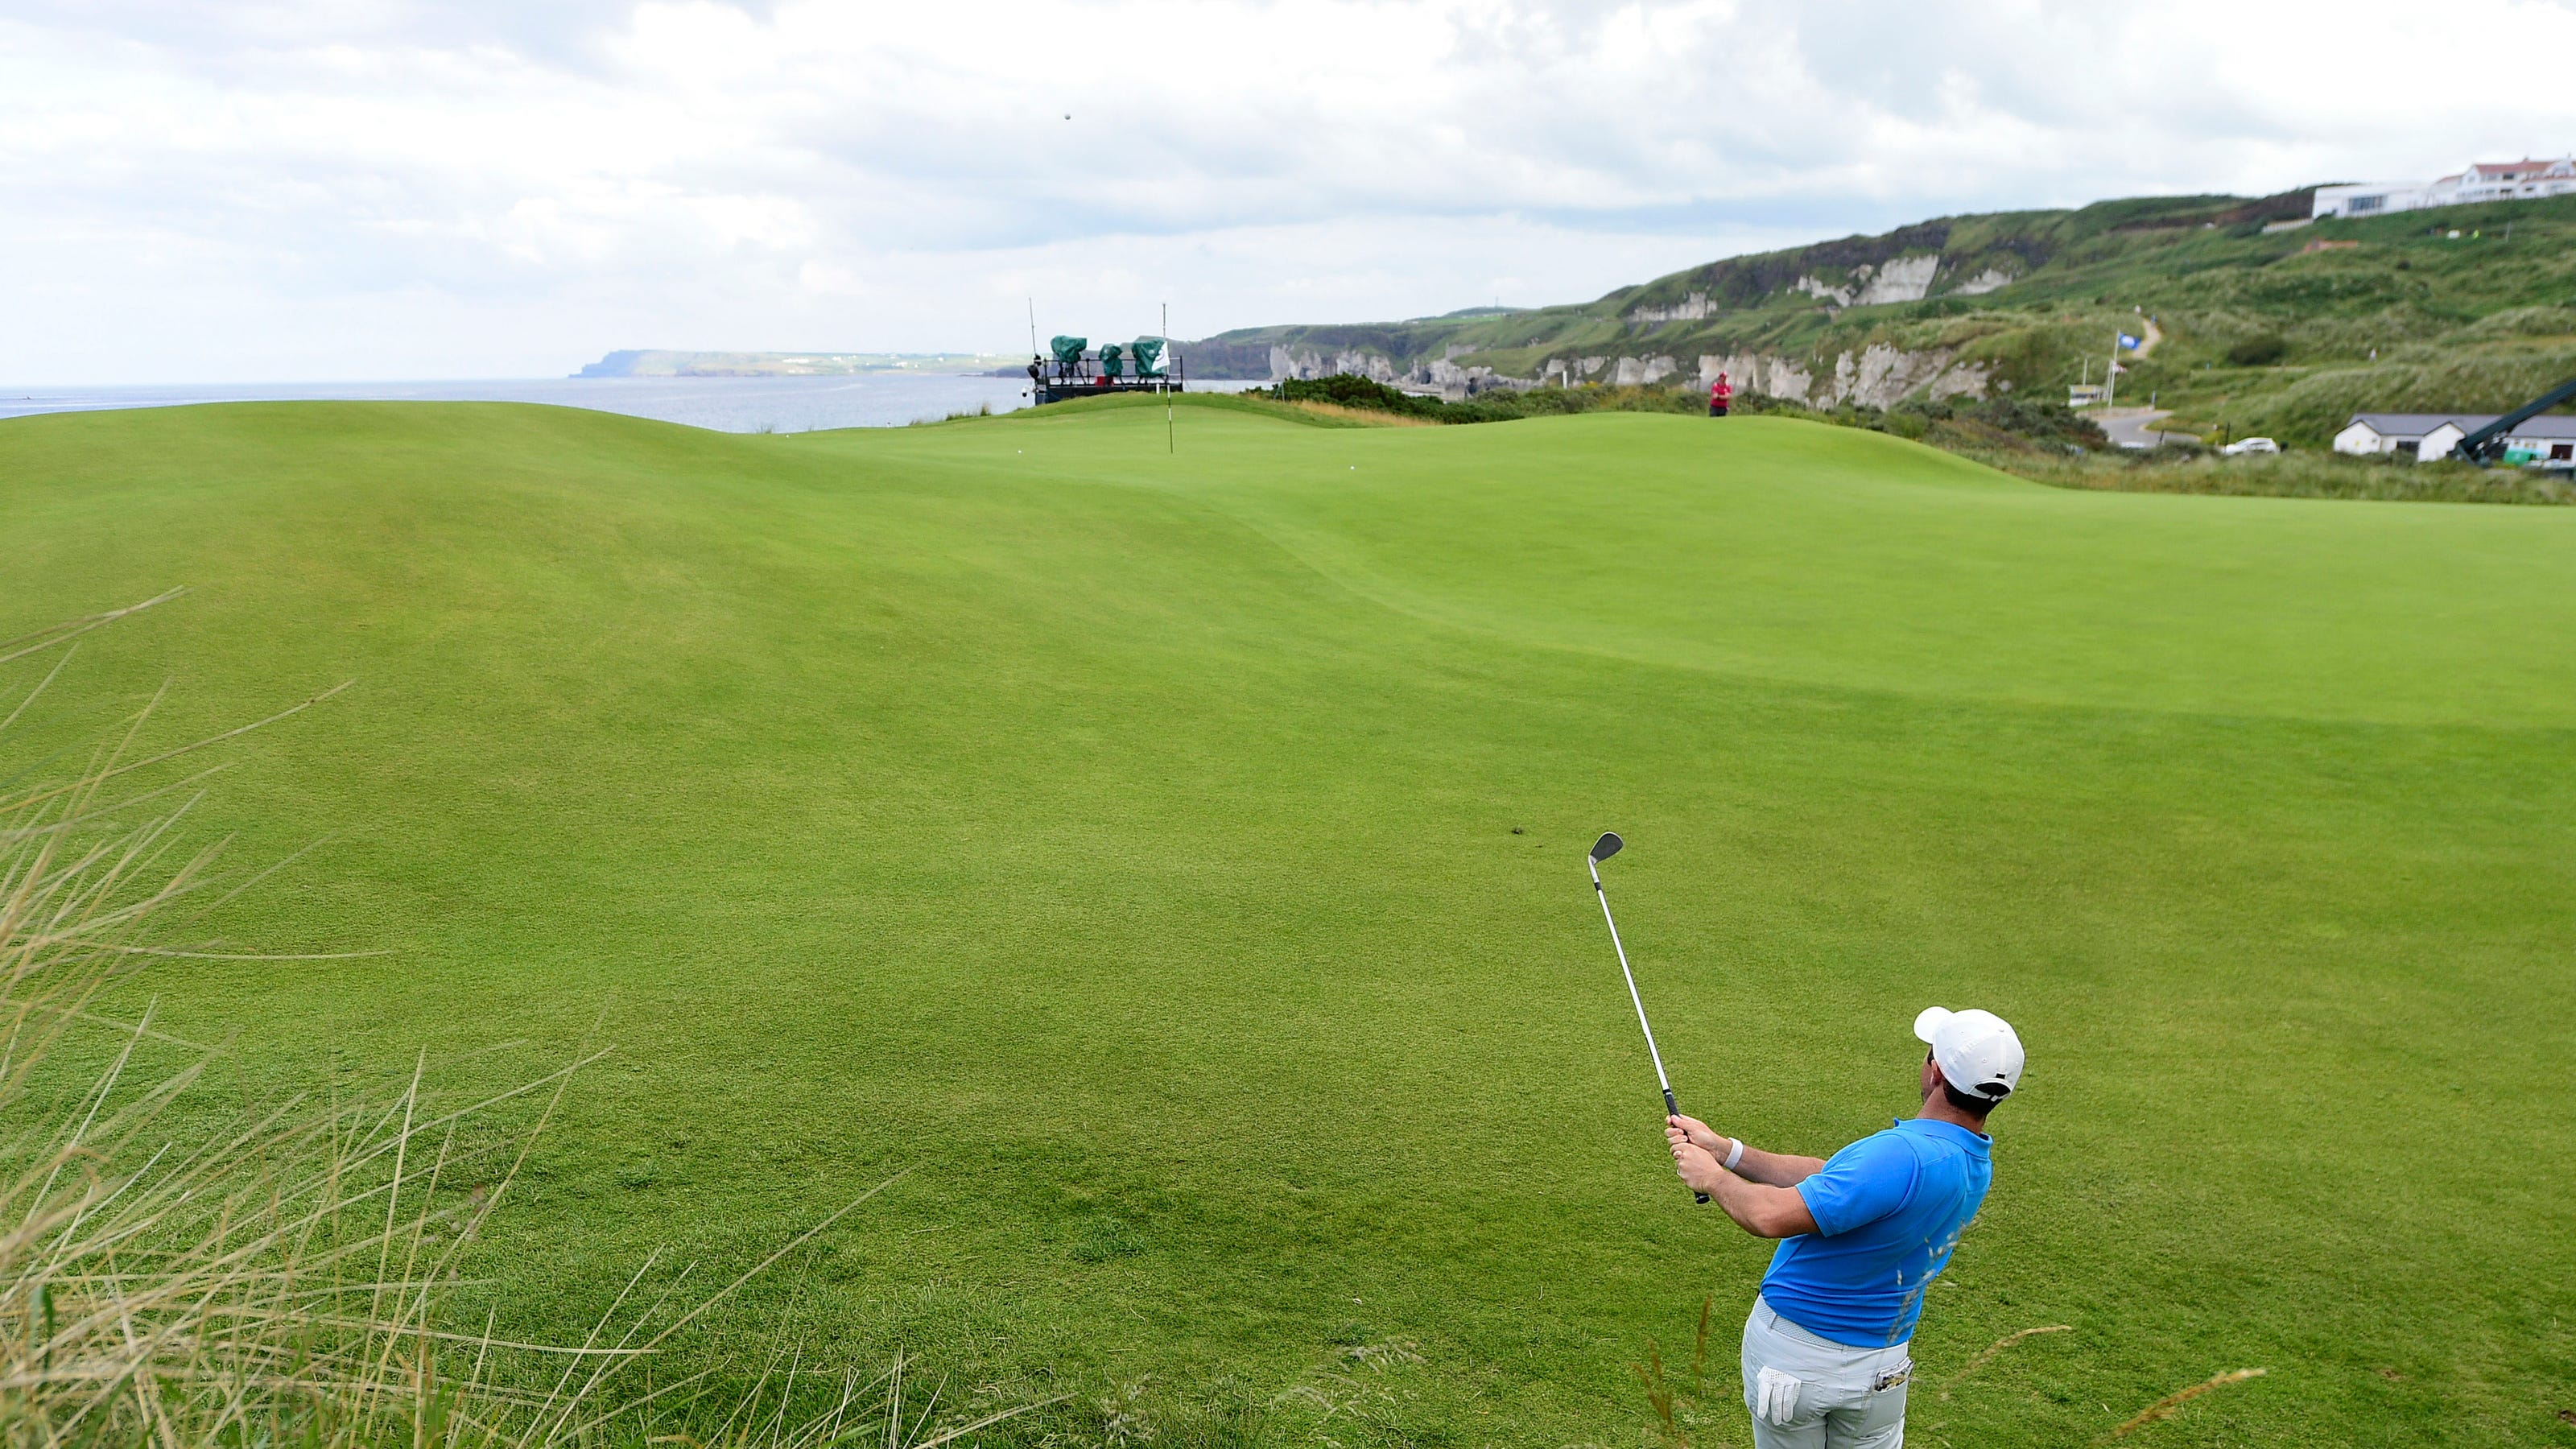 British Open 2019 Who to watch at Royal Portrush